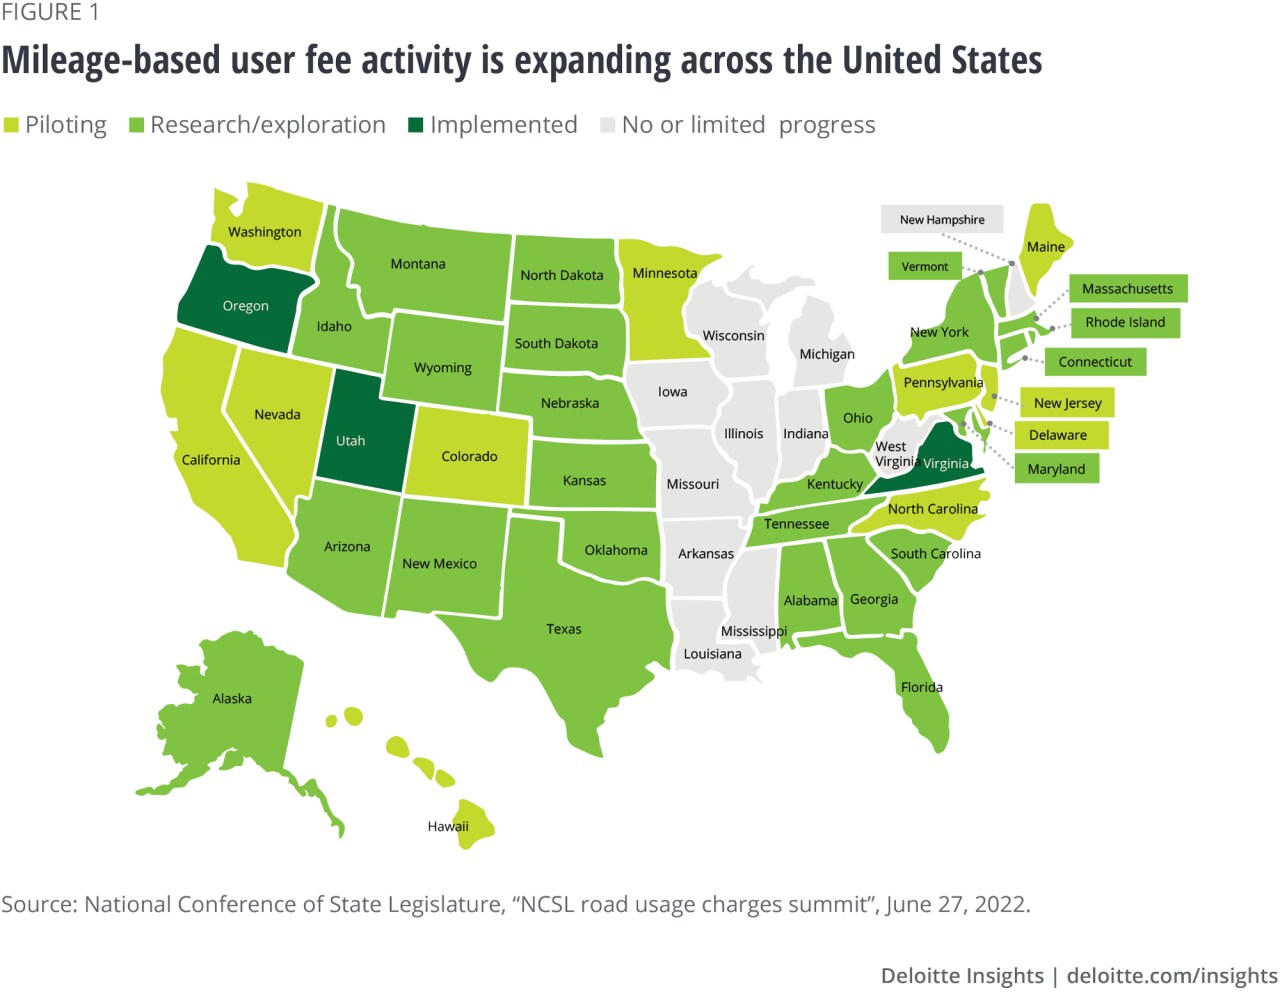 Figure 1. Mileage-based user fee activity is expanding across the United States